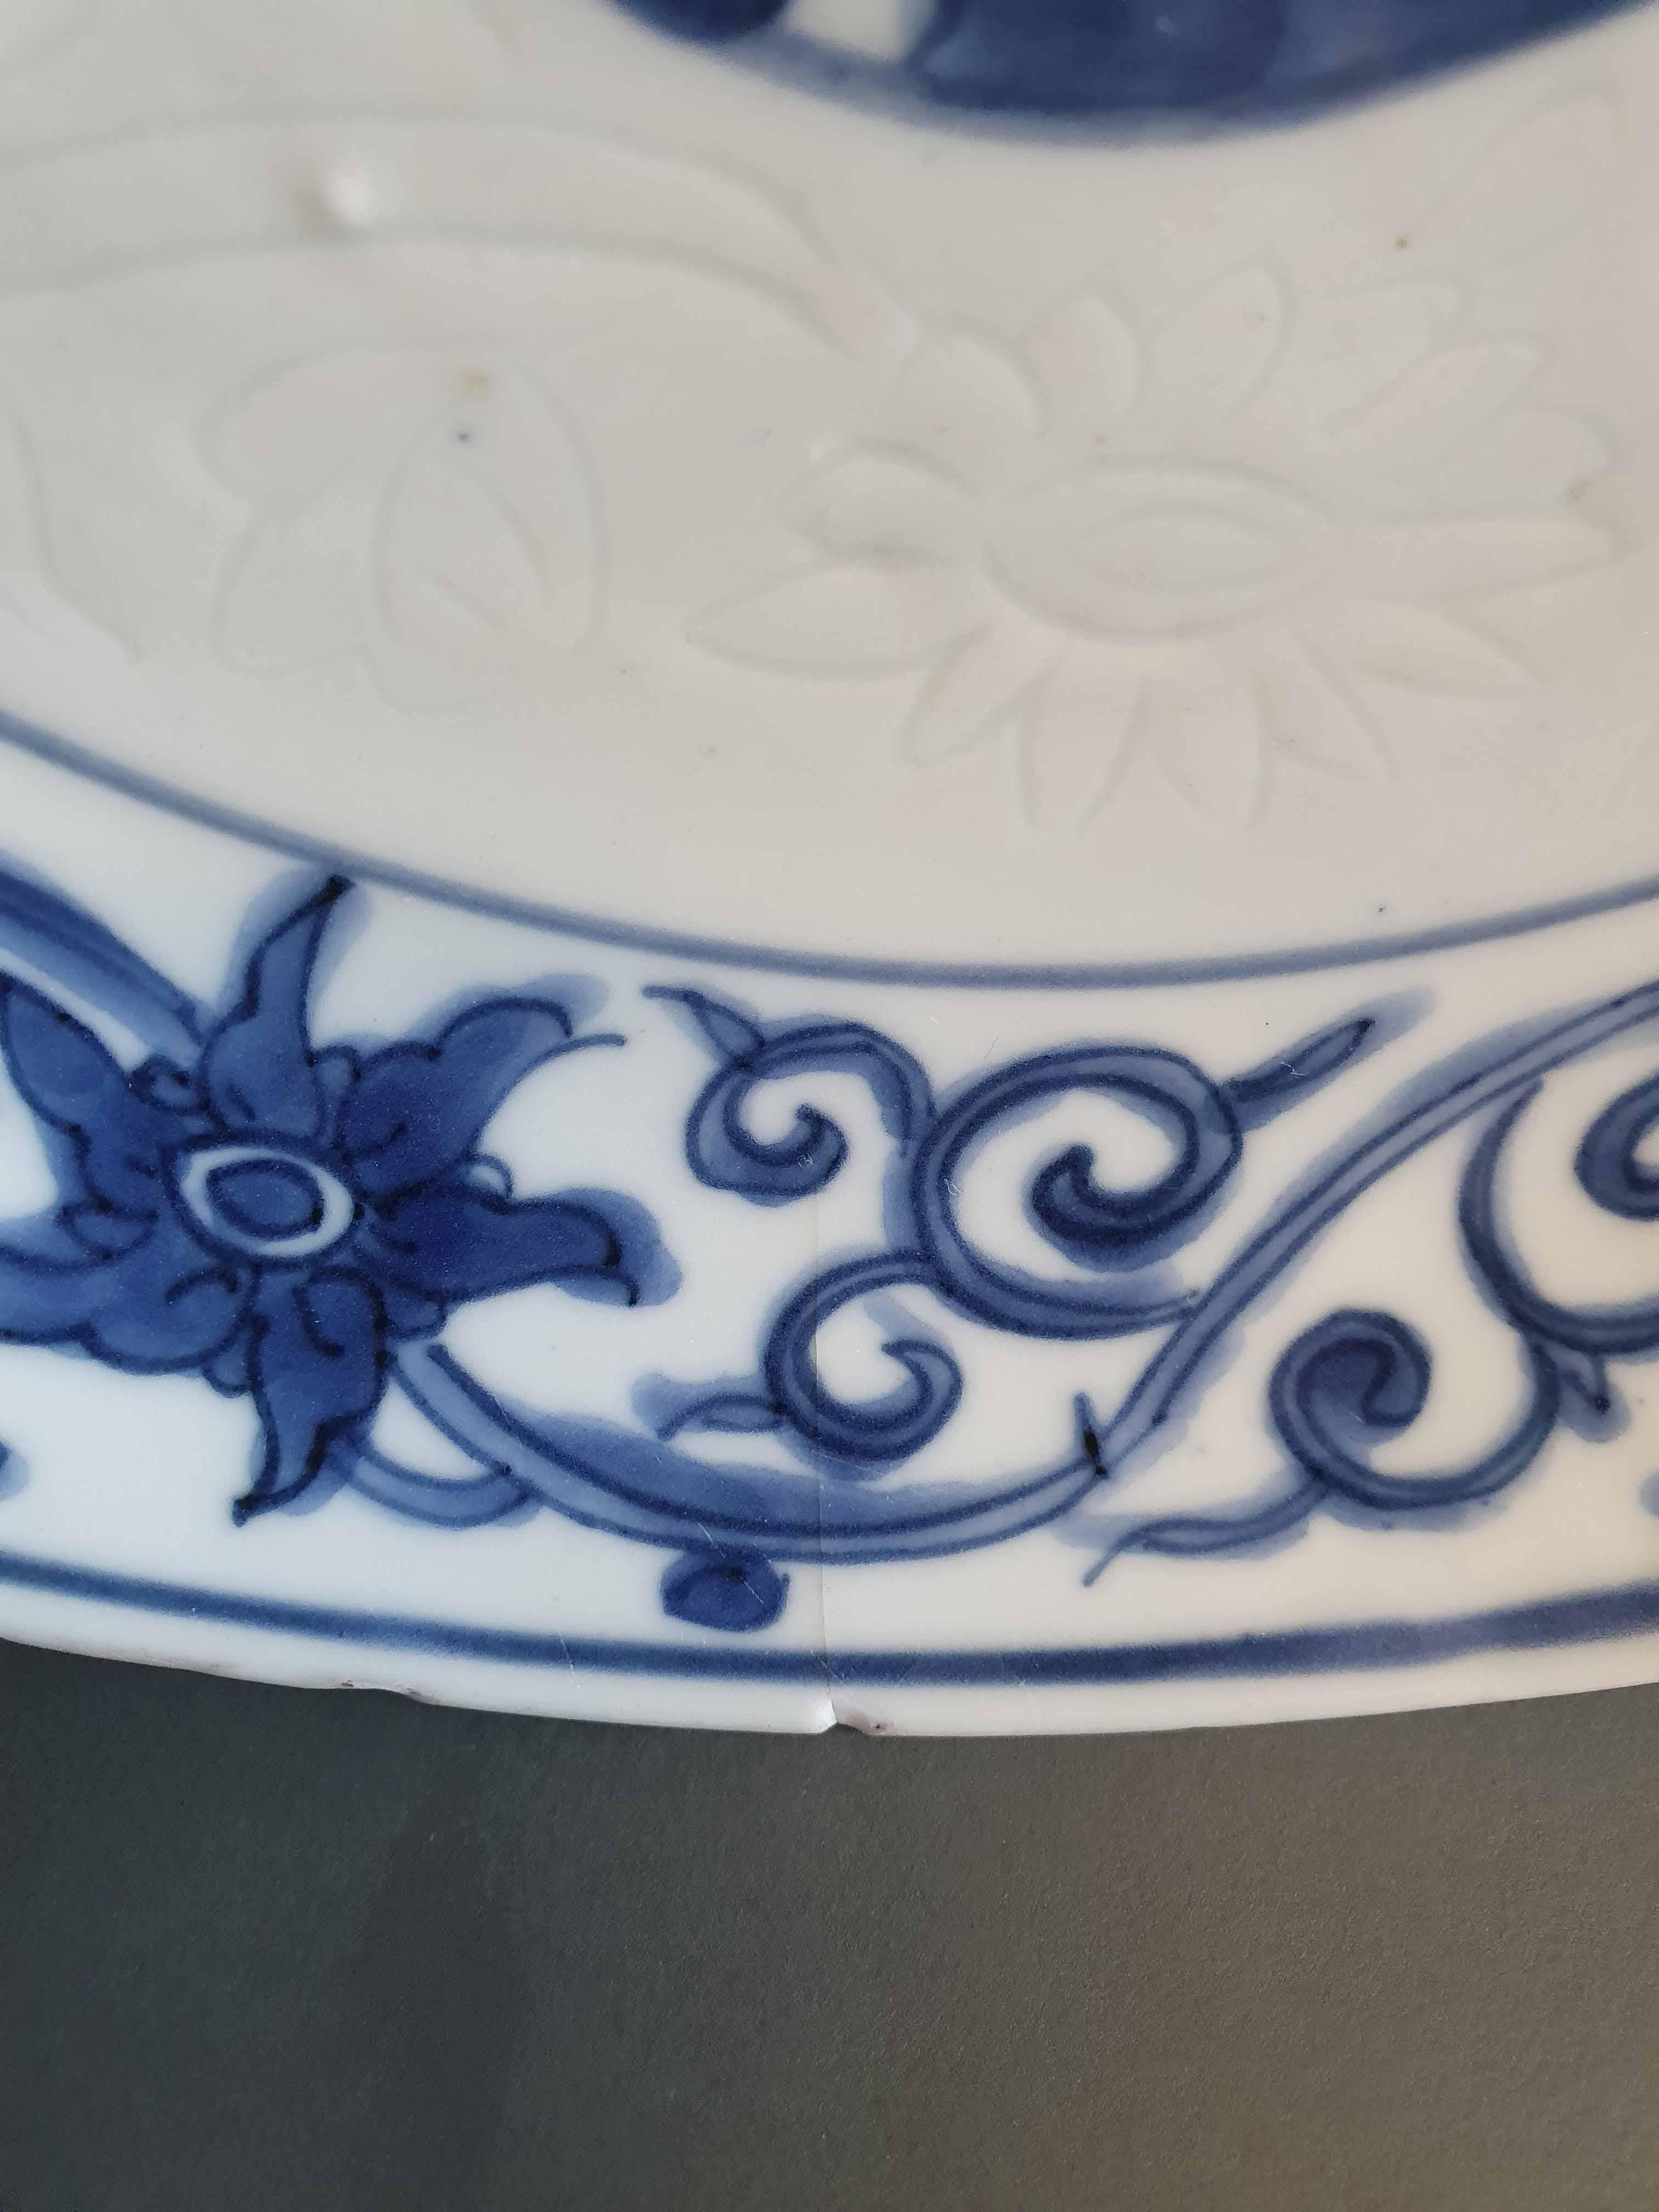 Description
A Blue & White Kosometsuke plate with a lovely scene of a lotus and hidden engraved anhua decoration of flowers in the white aera. Just Superb!

Condition
3 Chips, 1 line and typical rimfritting/mushikui. Size 215 x 40 mm D X